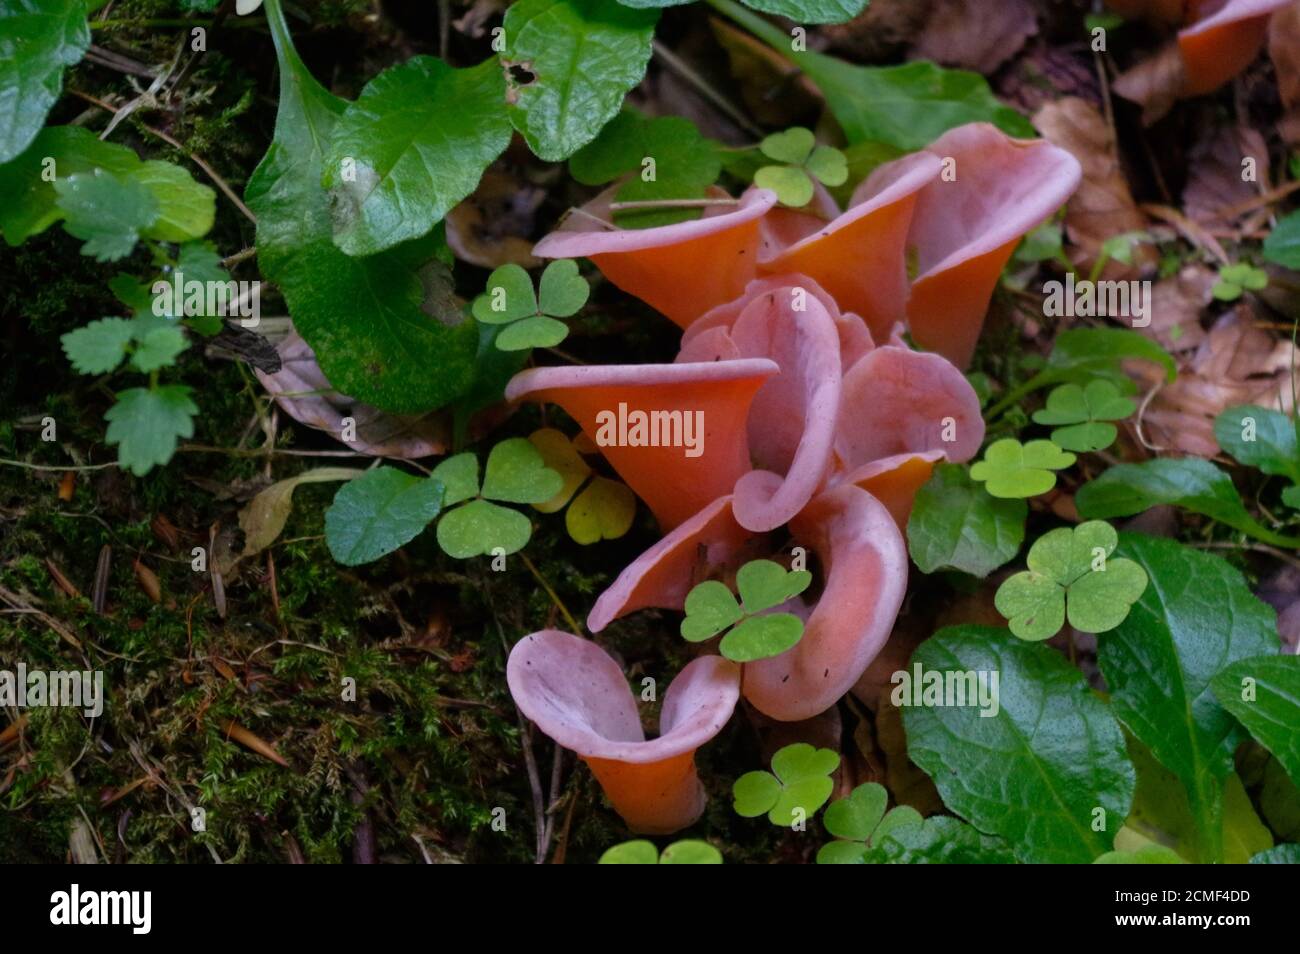 rose hirneola auricula-judae or Auricularia - fungus, also known as jew's ear, wood jelly between green plants Stock Photo